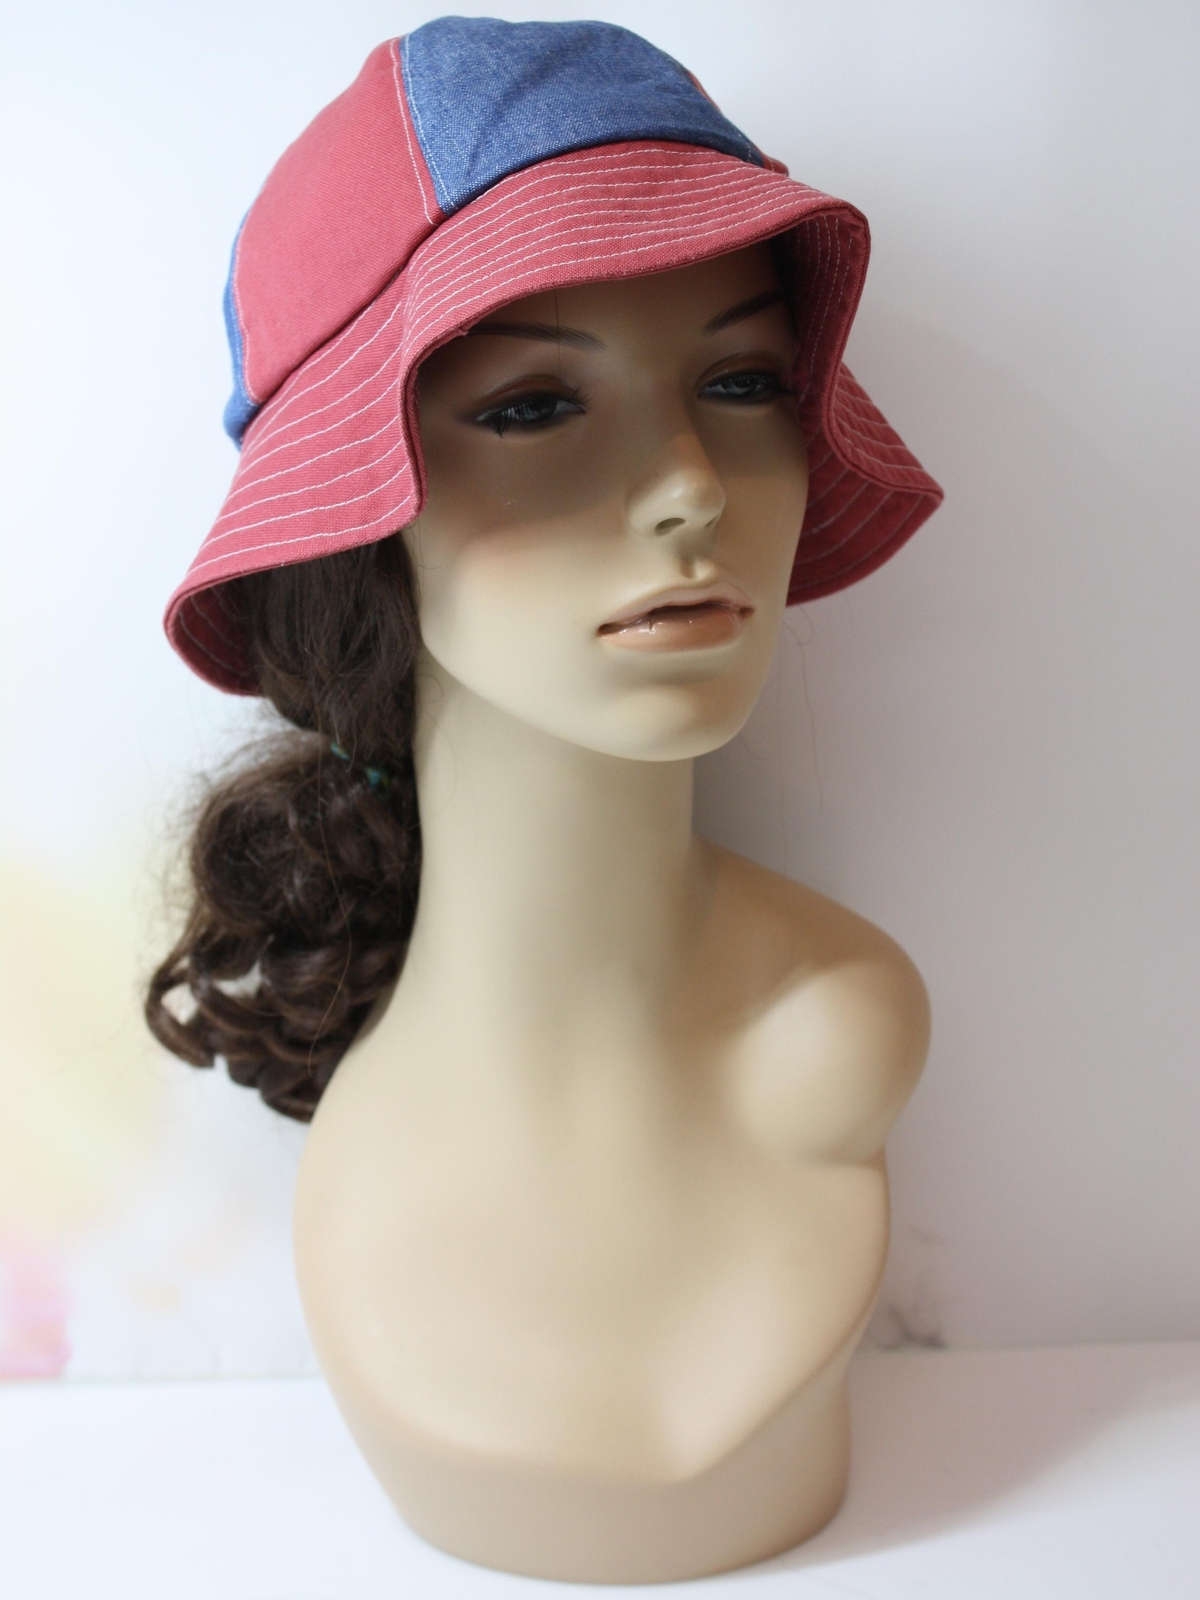 Retro Seventies Hat: 70s -Missing Label- Womens deep rose pink and blue  color block print cotton blend bucket style hat with a 3 inch wide brim and  white top stitching.